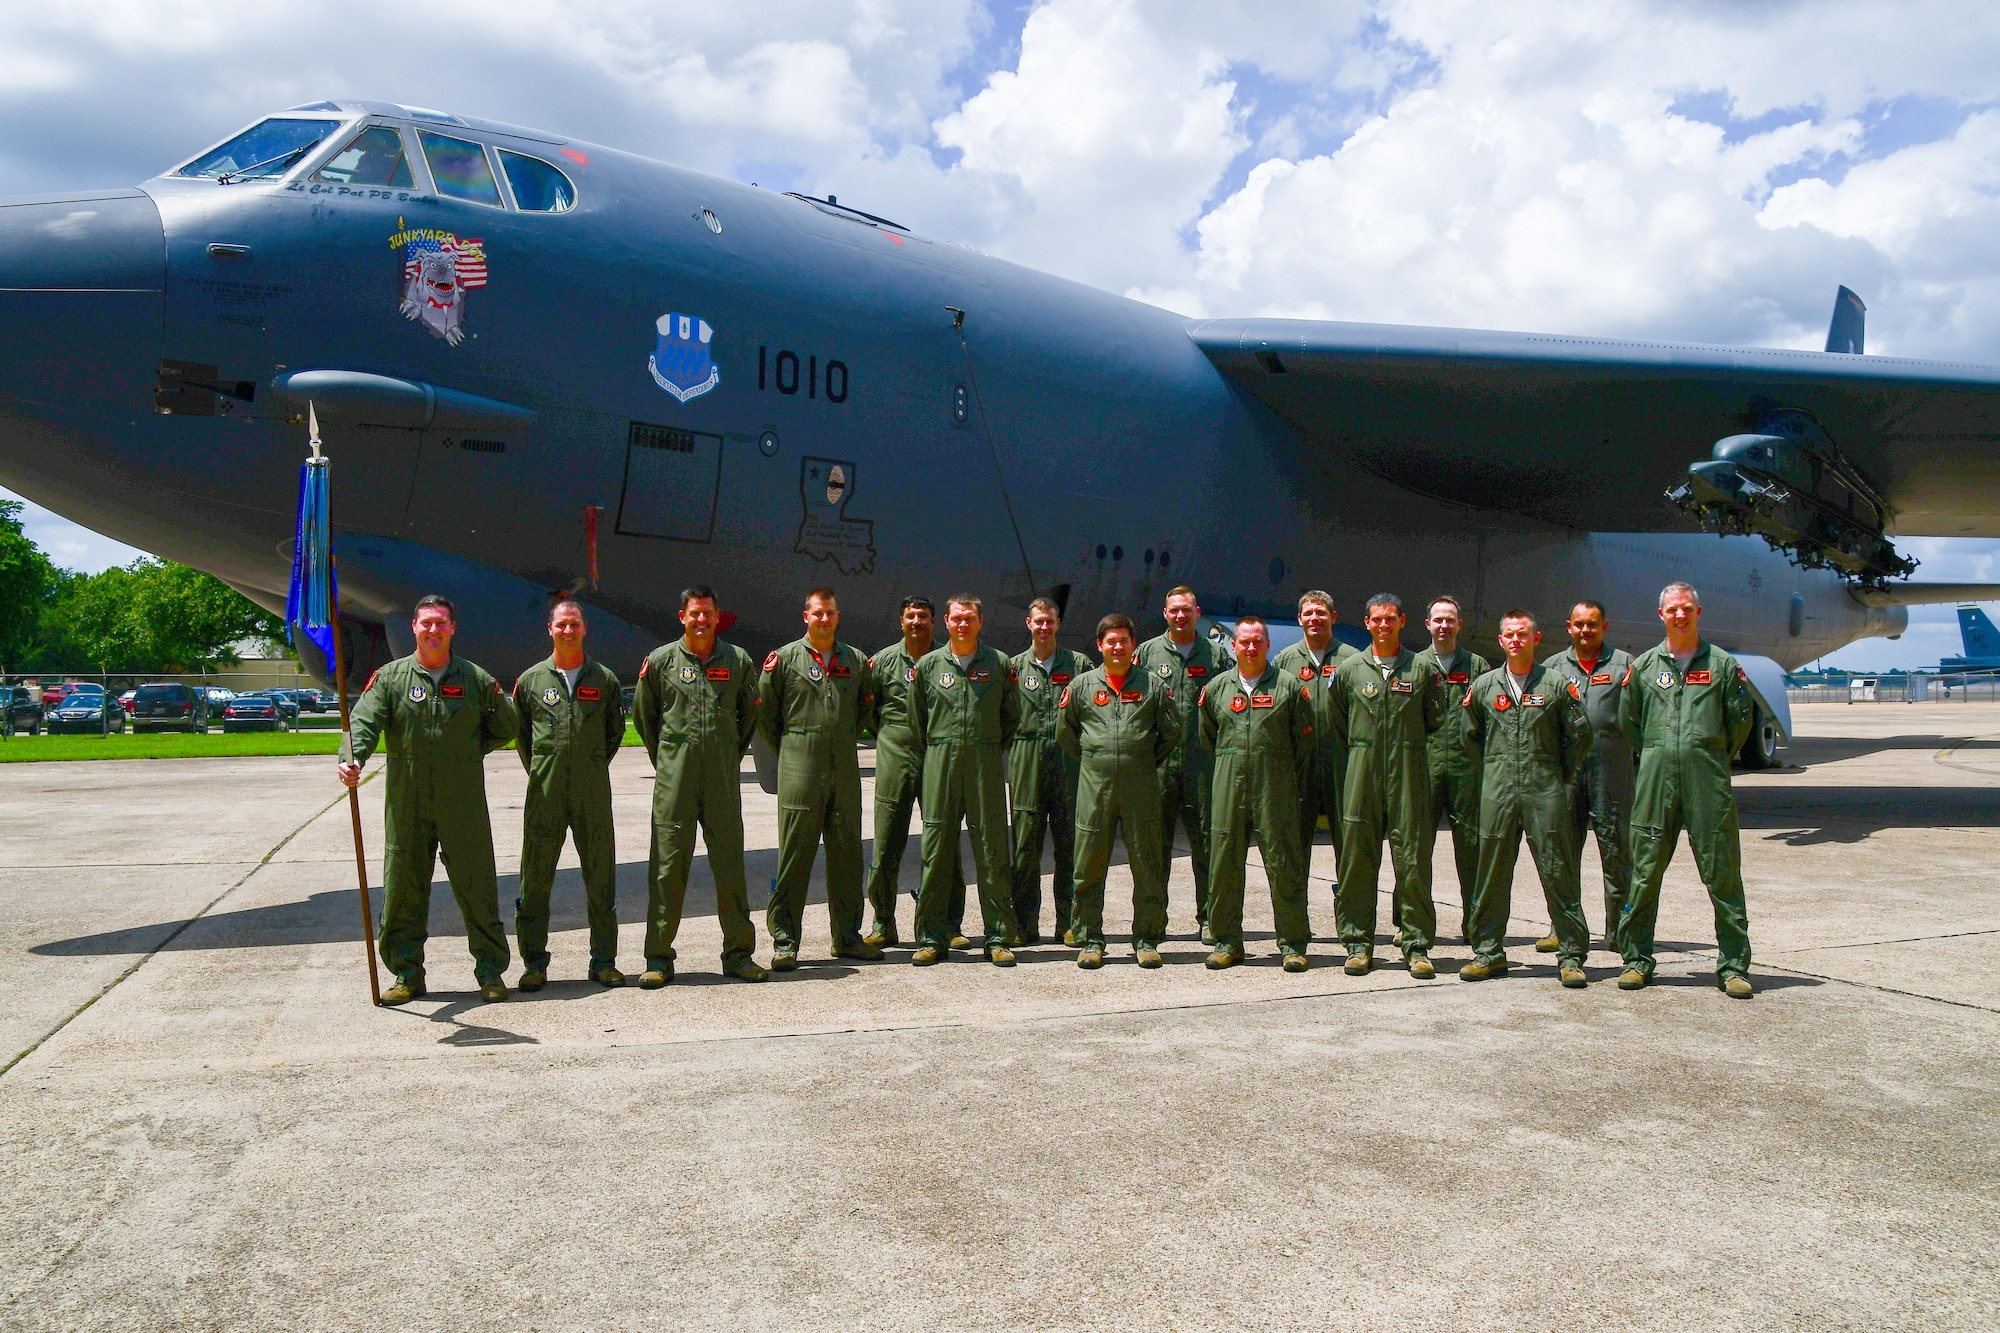 Airmen of the 343rd Bomb Squadron stand with their new commander, Lt. Col. John P. Booker in front of the commander’s B-52 Stratofortress on Barksdale Air Force Base, La. June 3, 2017. The bomb squadron is the only Air Force Reserve that is nuclear certified. (U.S. Air Force photo by Master Sgt. Dachelle Melville/Released)